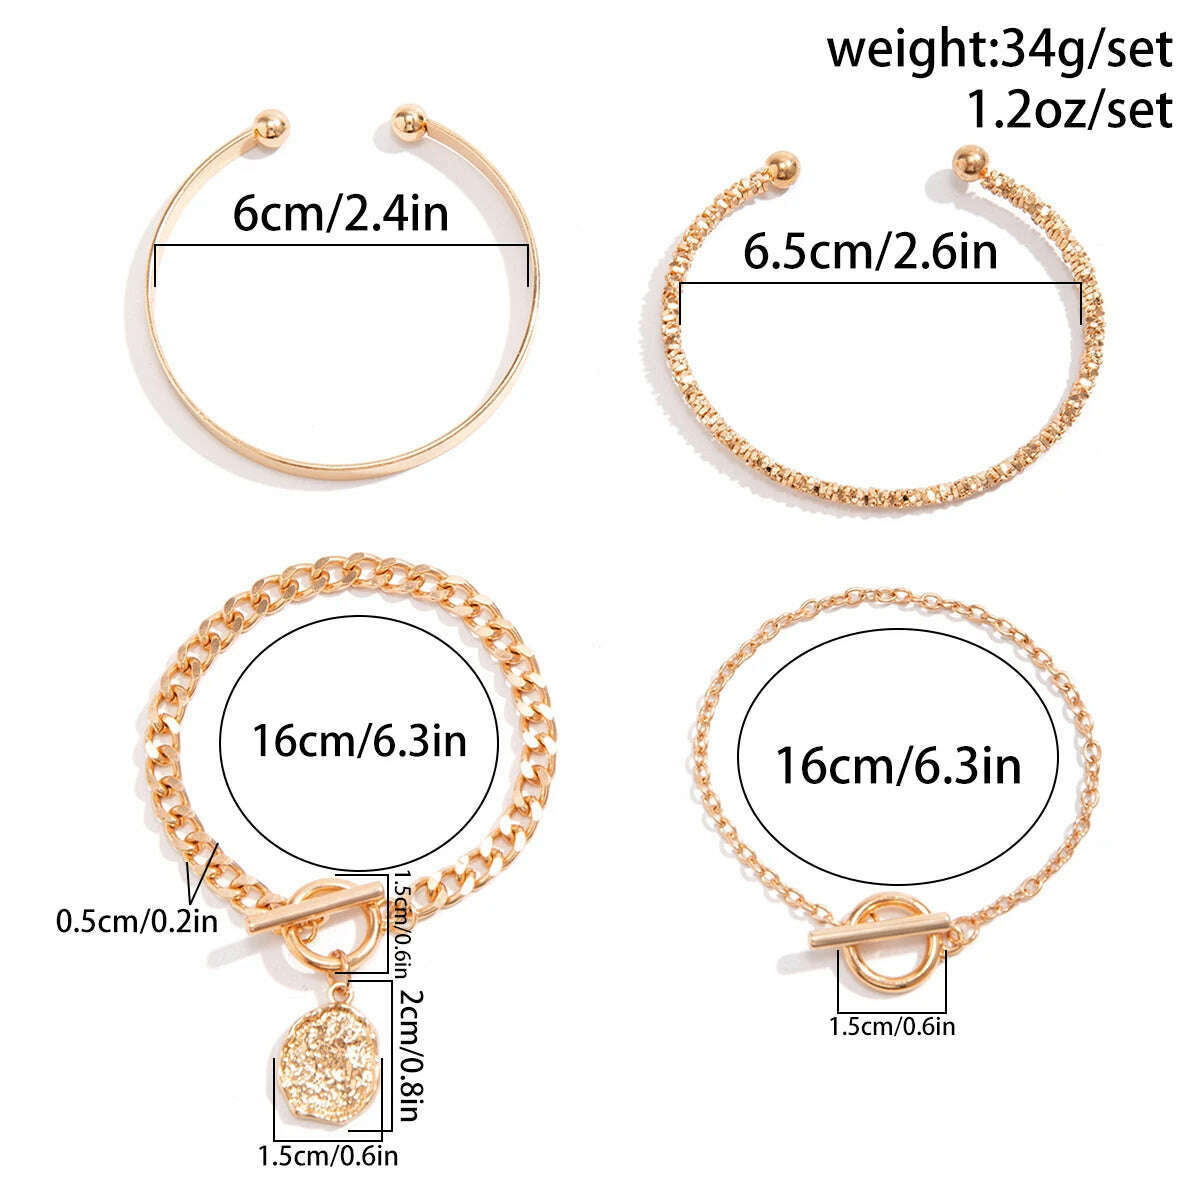 KIMLUD, Ingemark 4Pcs/Set Vintage OT Buckle Coin Pendant Bracelet for Women on Hand Goth Open Charm Bangles Couple Friends Jewelry Gift, KIMLUD Womens Clothes